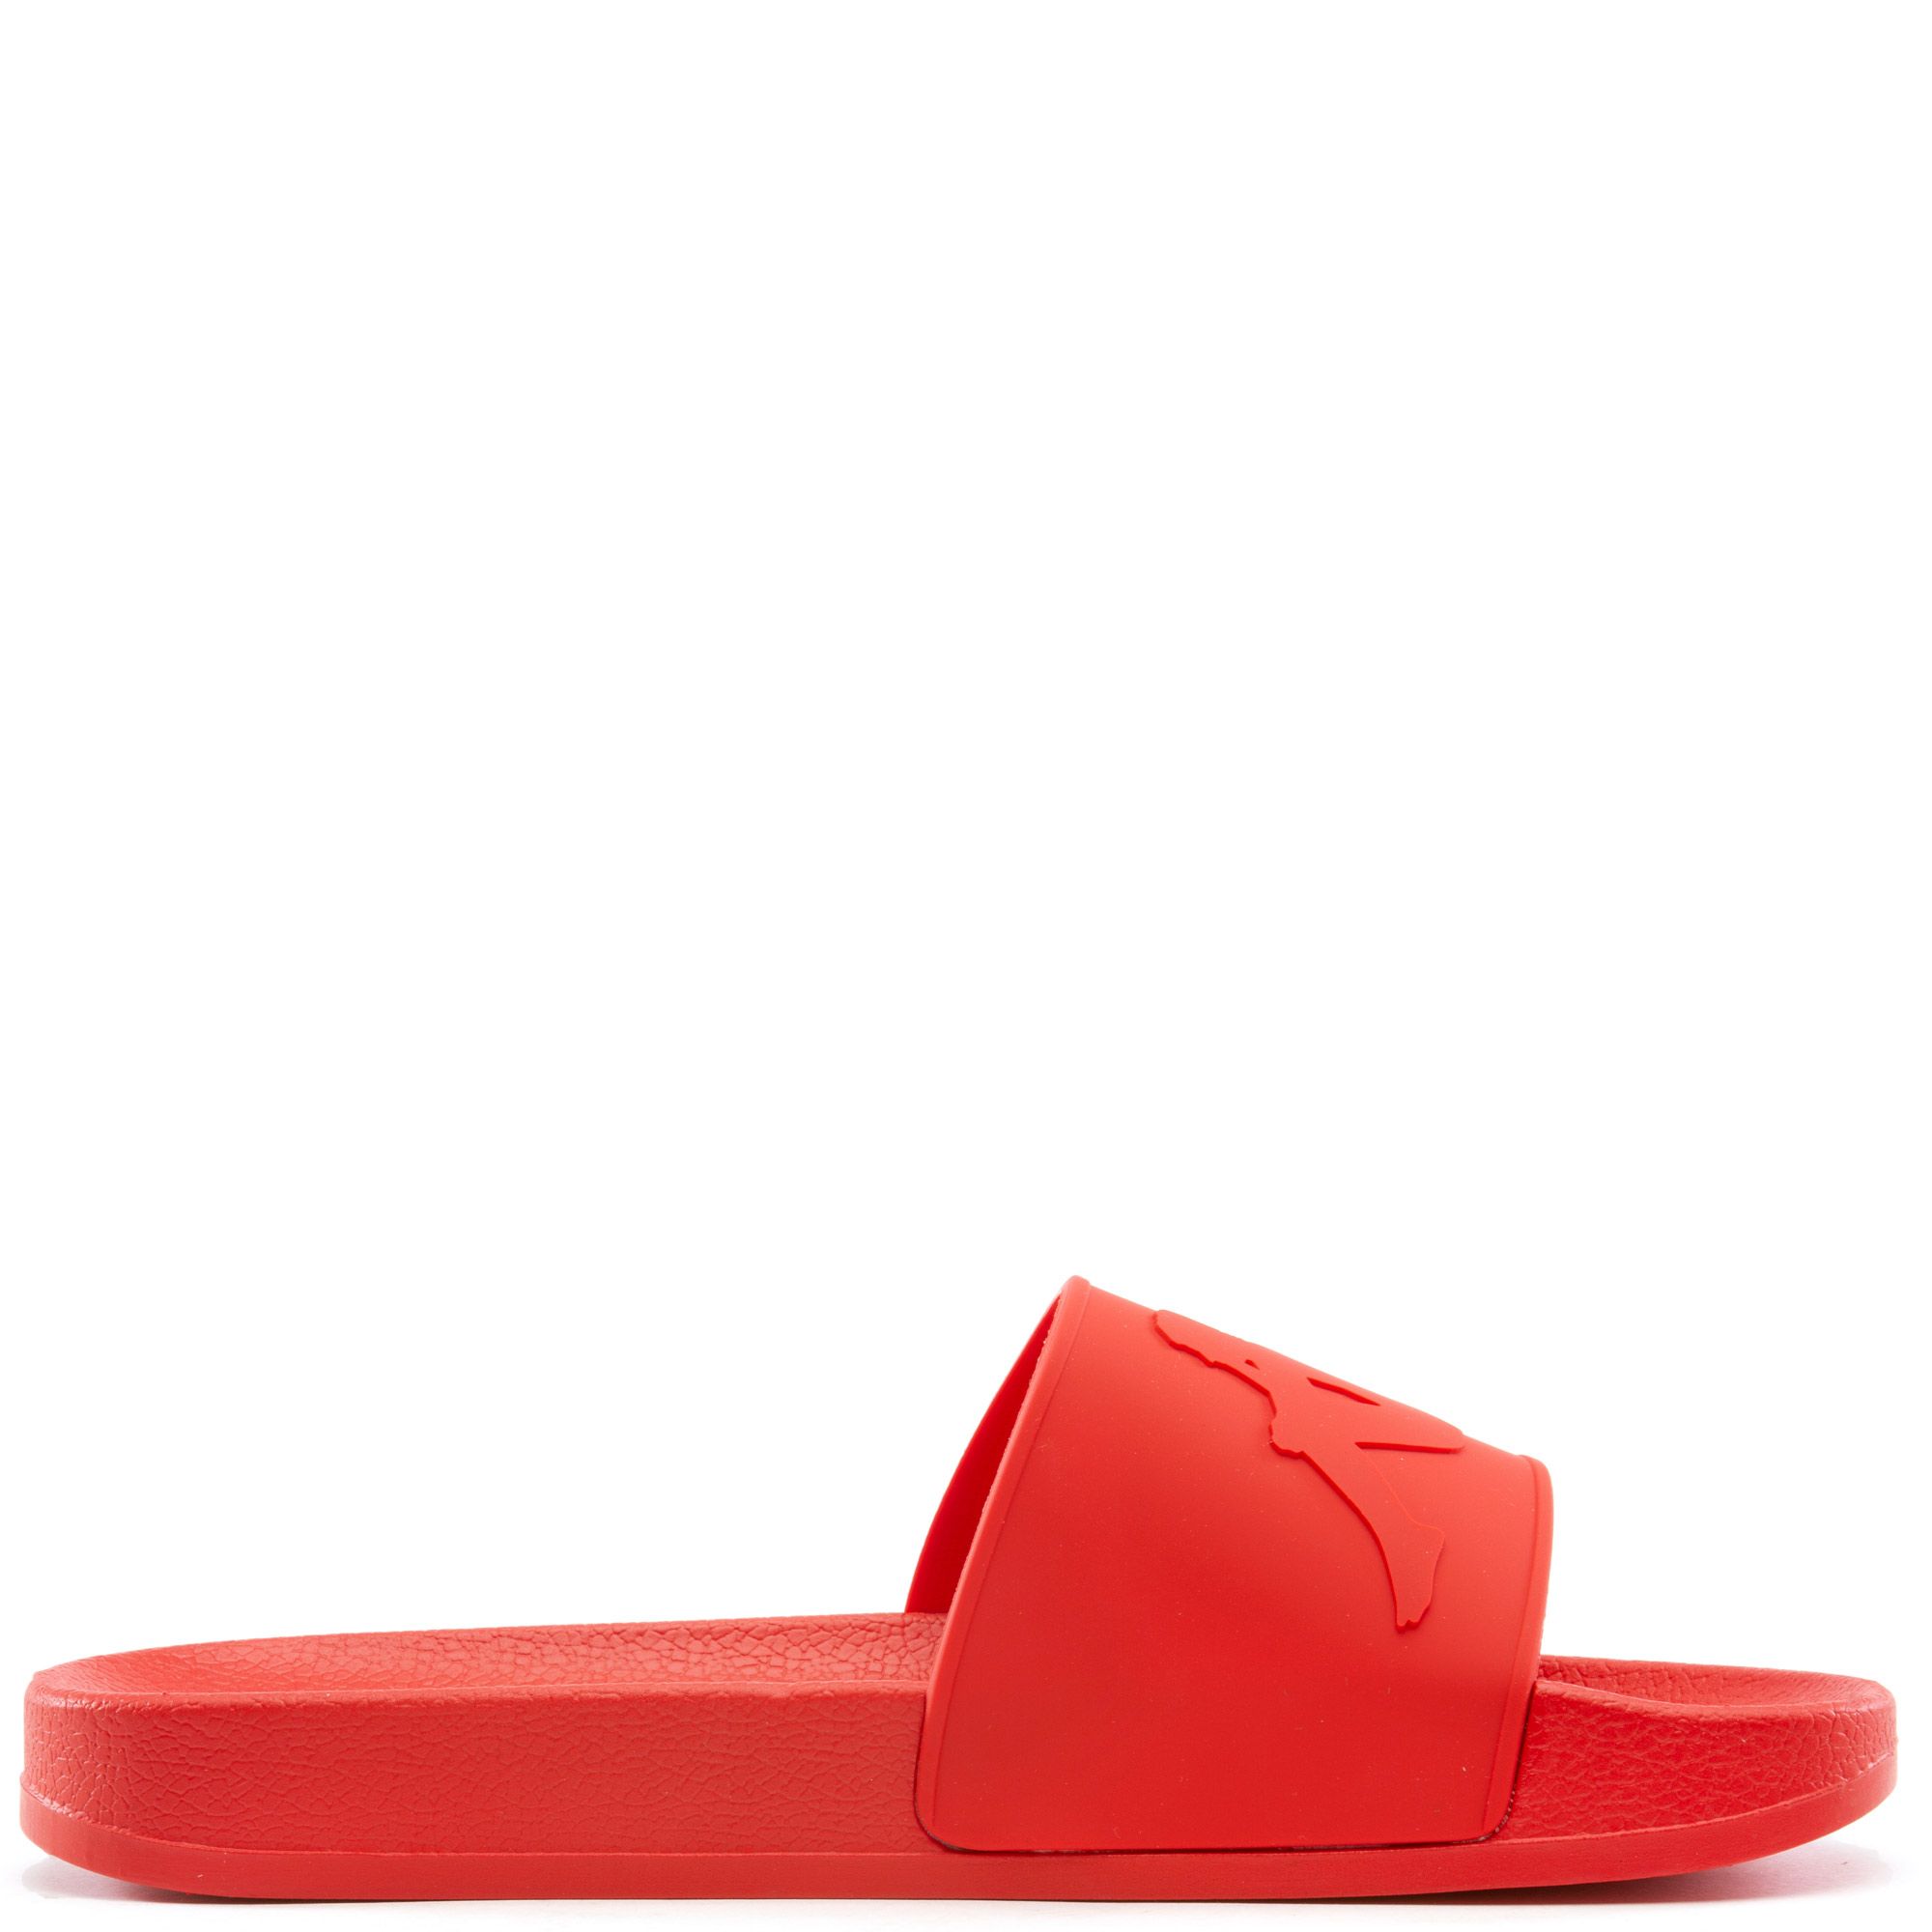 Kappa | Authentic Caius 2 Slides - Red 8 / Red / 36148NW-A1J